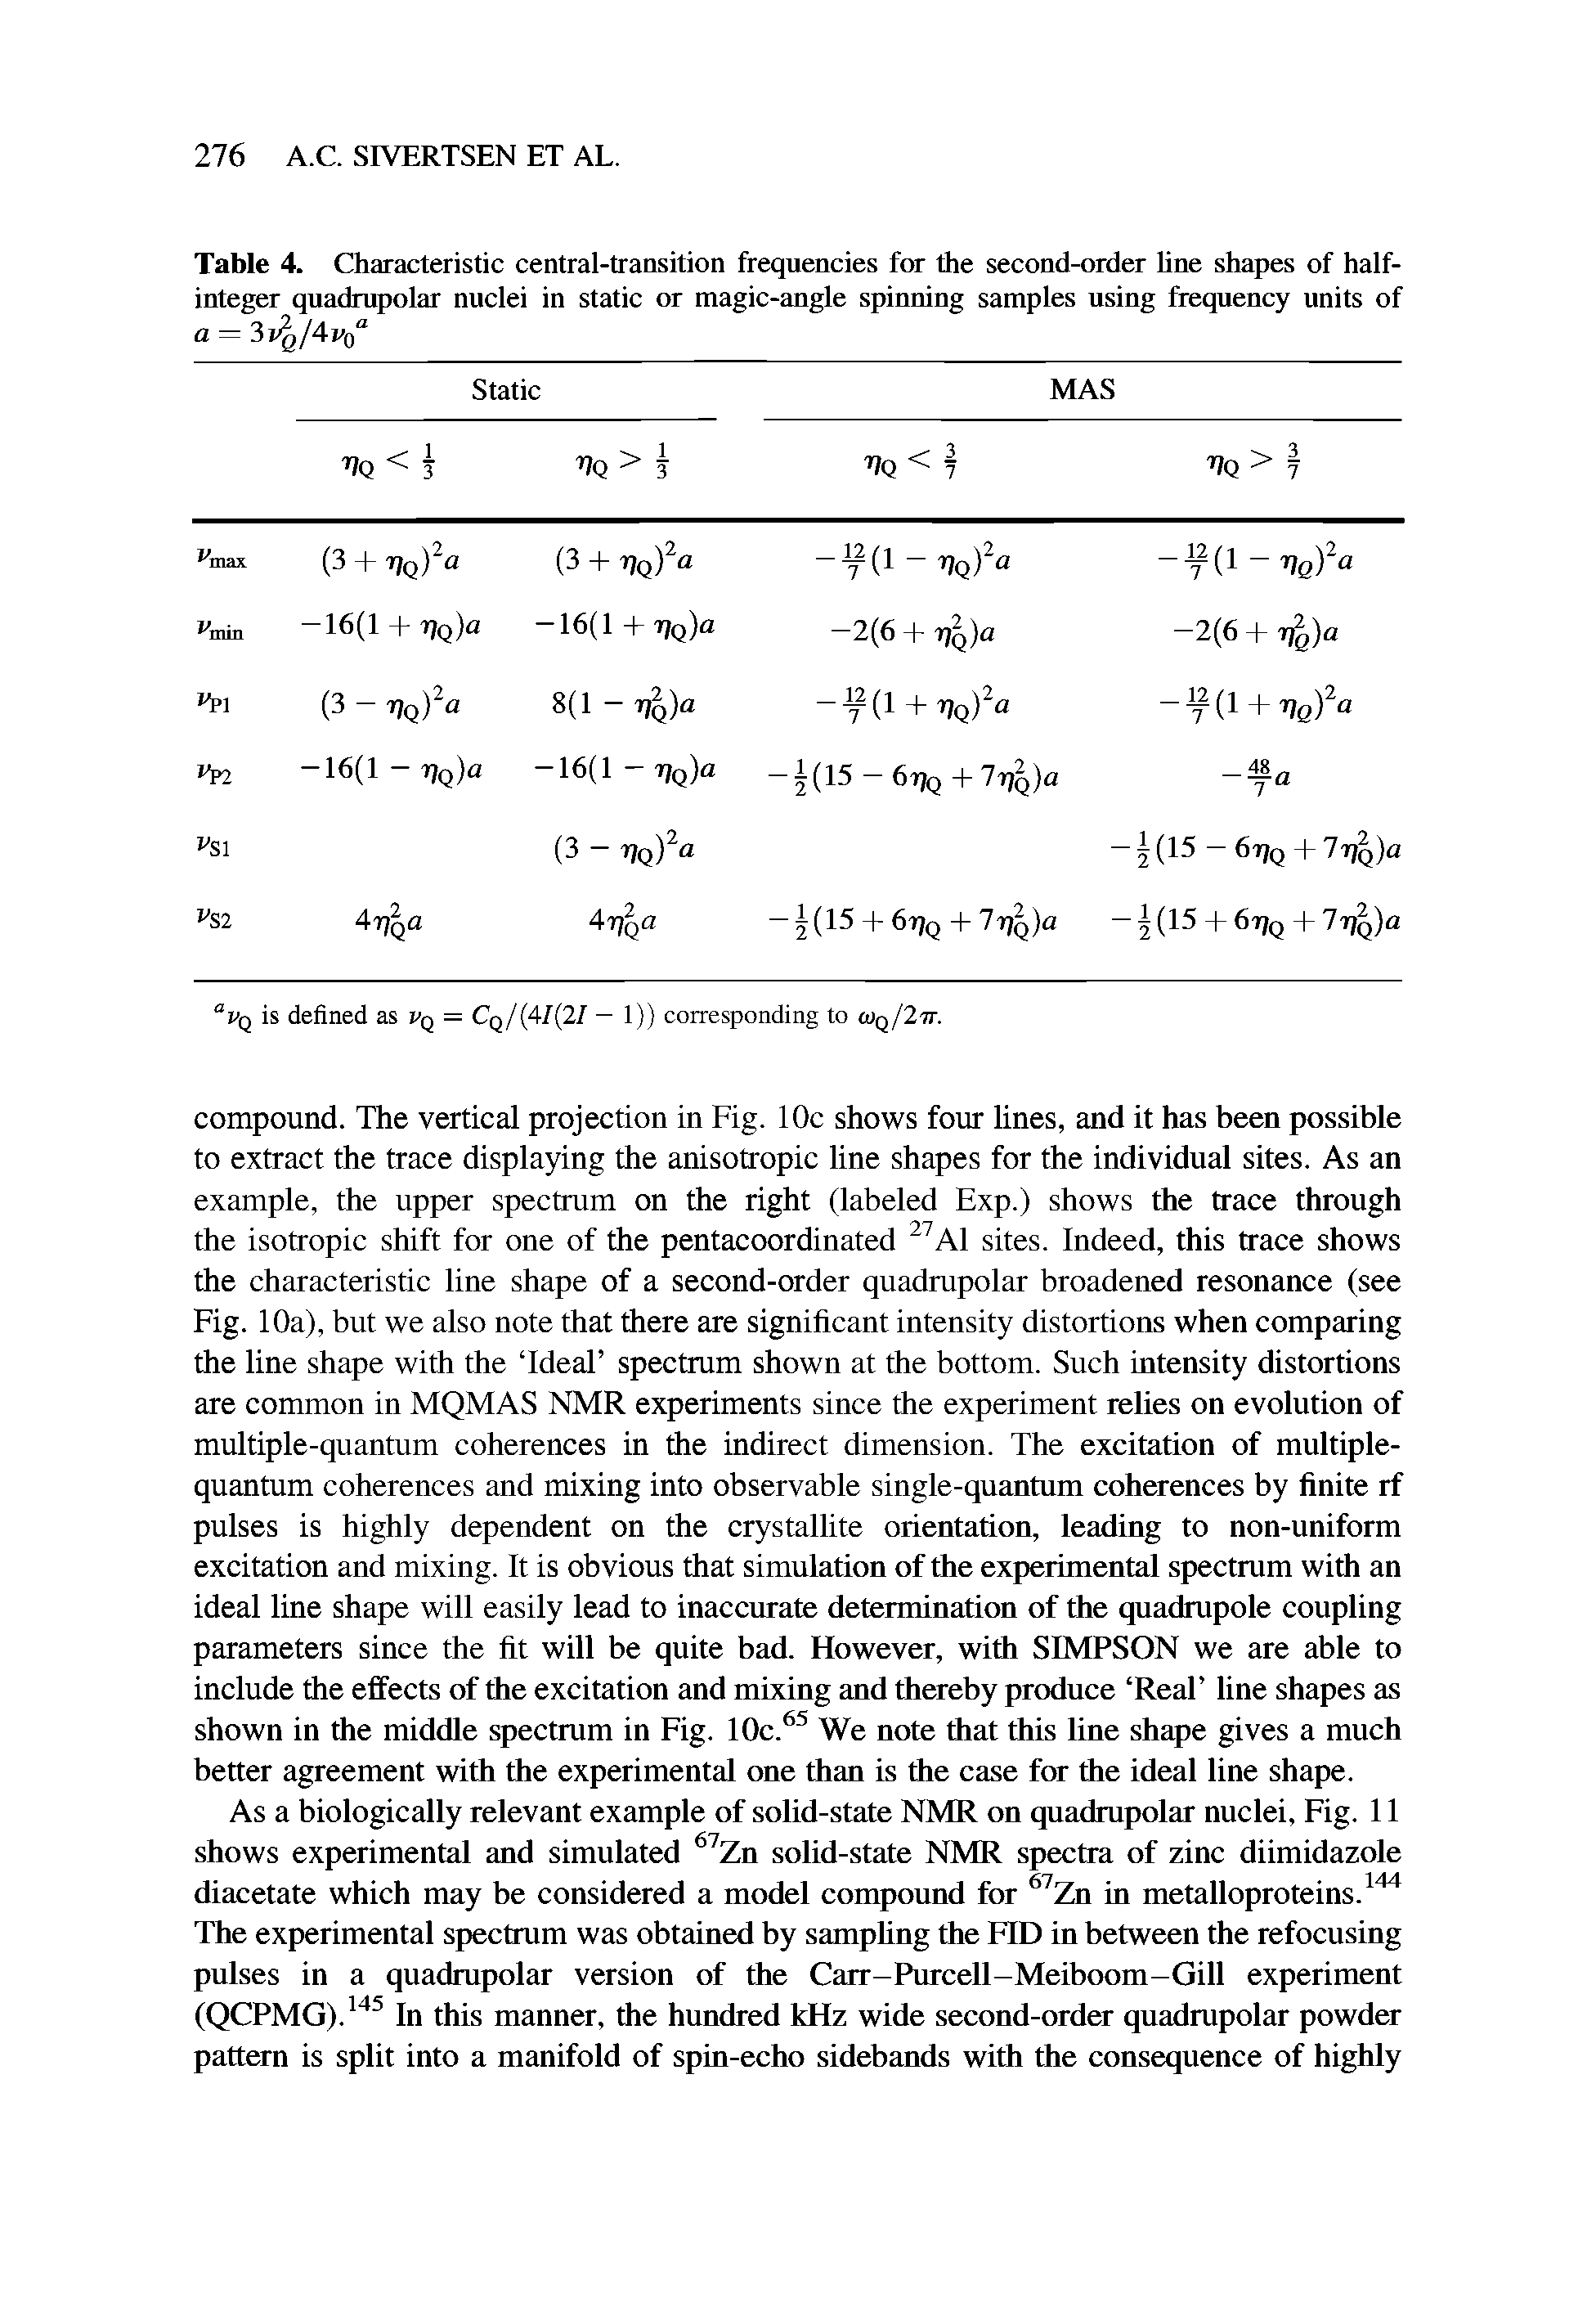 Table 4. Characteristic central-transition frequencies for the second-order hne shapes of halfinteger quadrupolar nuclei in static or magic-angle spinning samples using frequency units of a = 3j /4fo ...